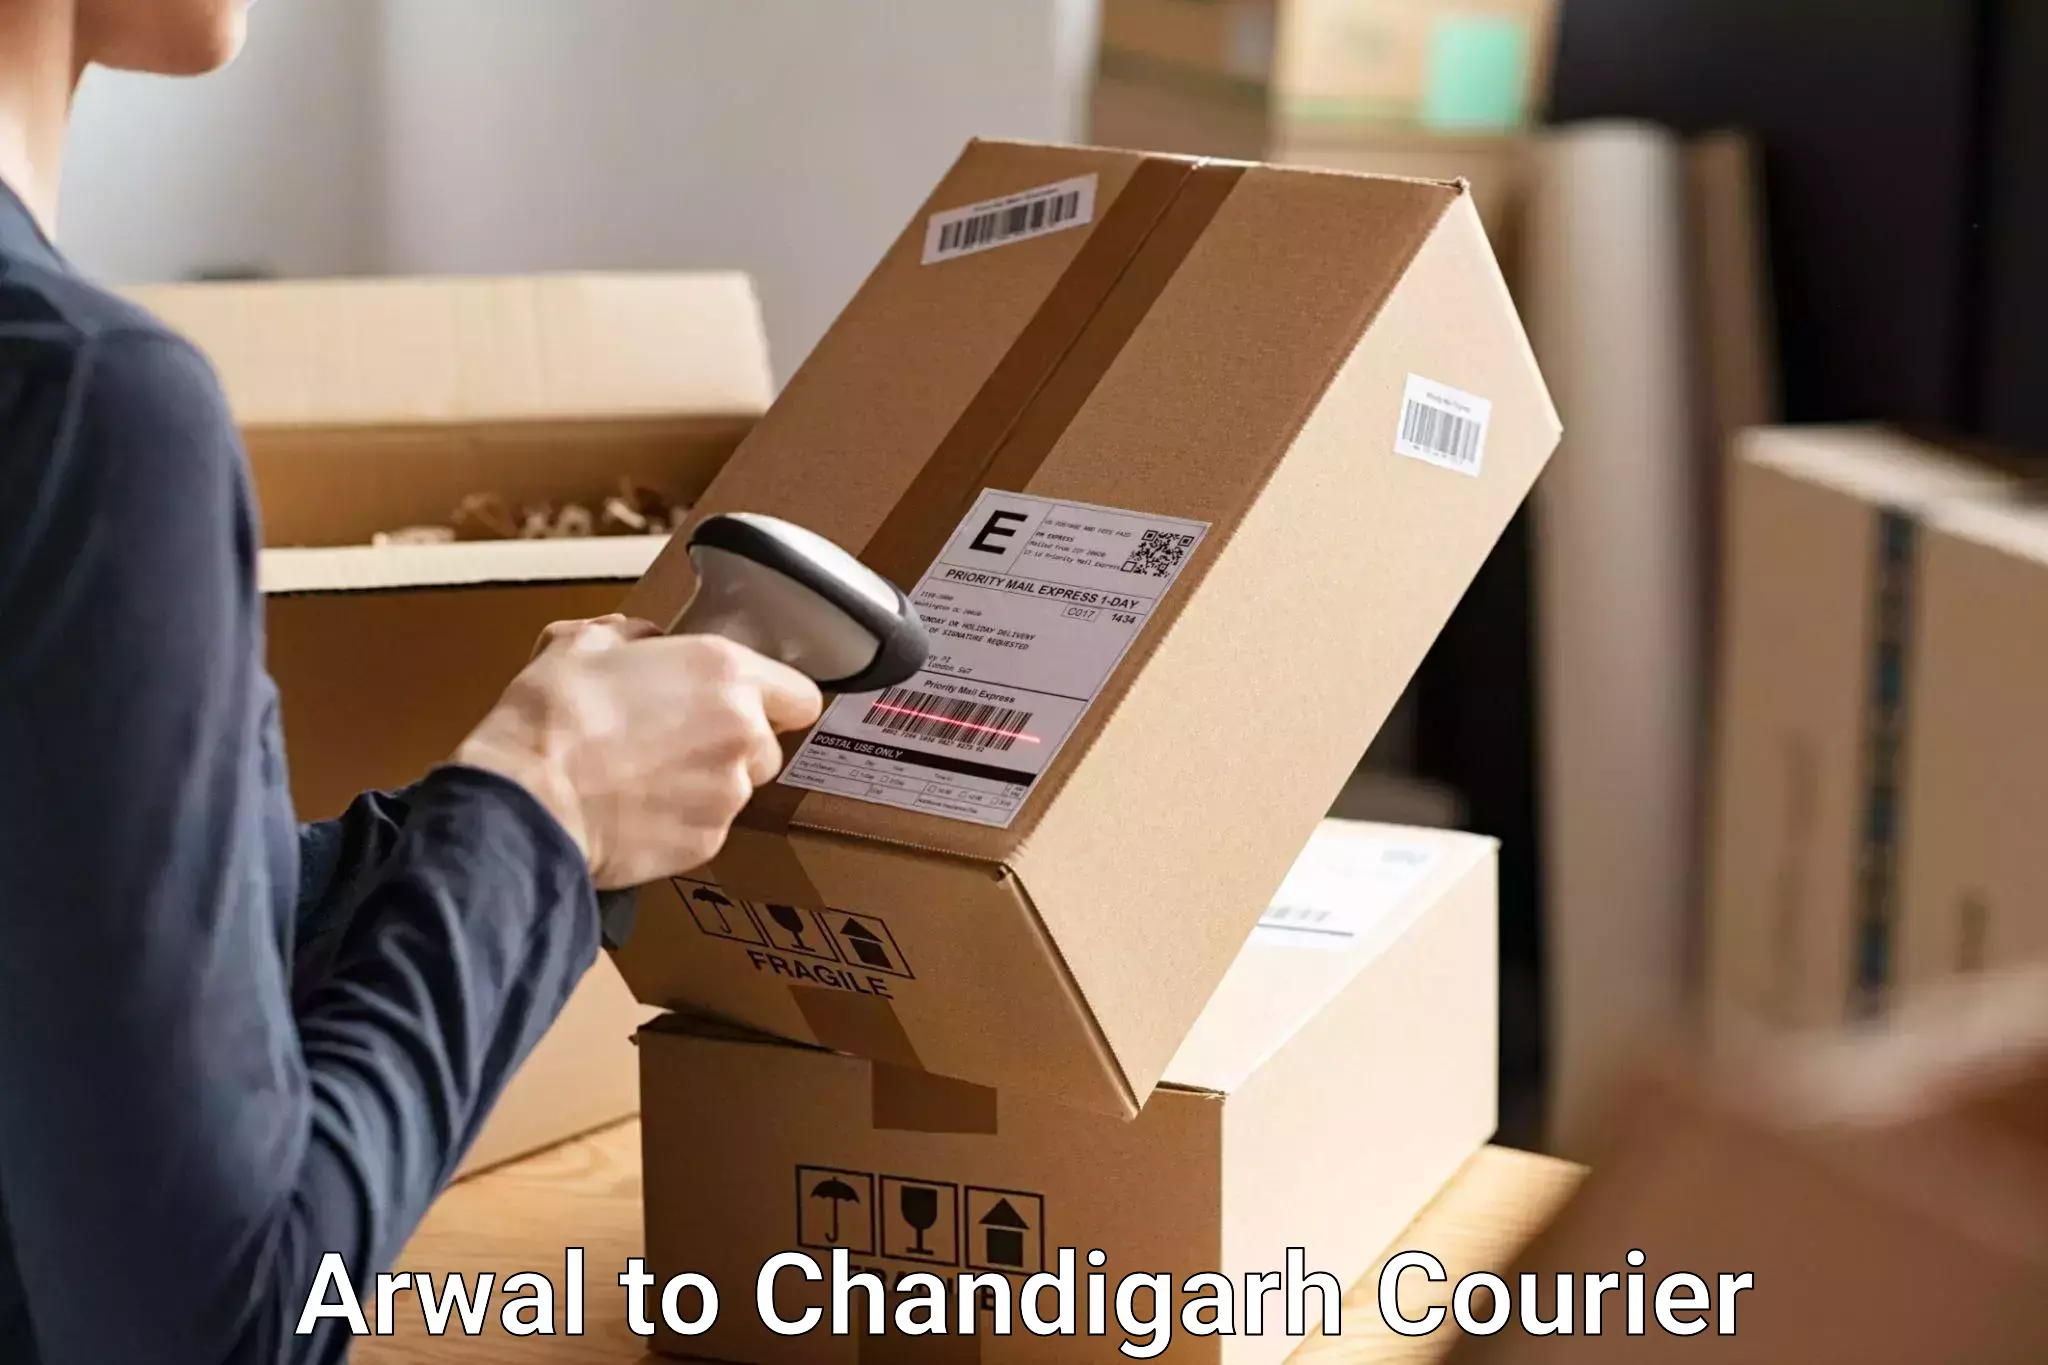 Luggage transport service Arwal to Chandigarh